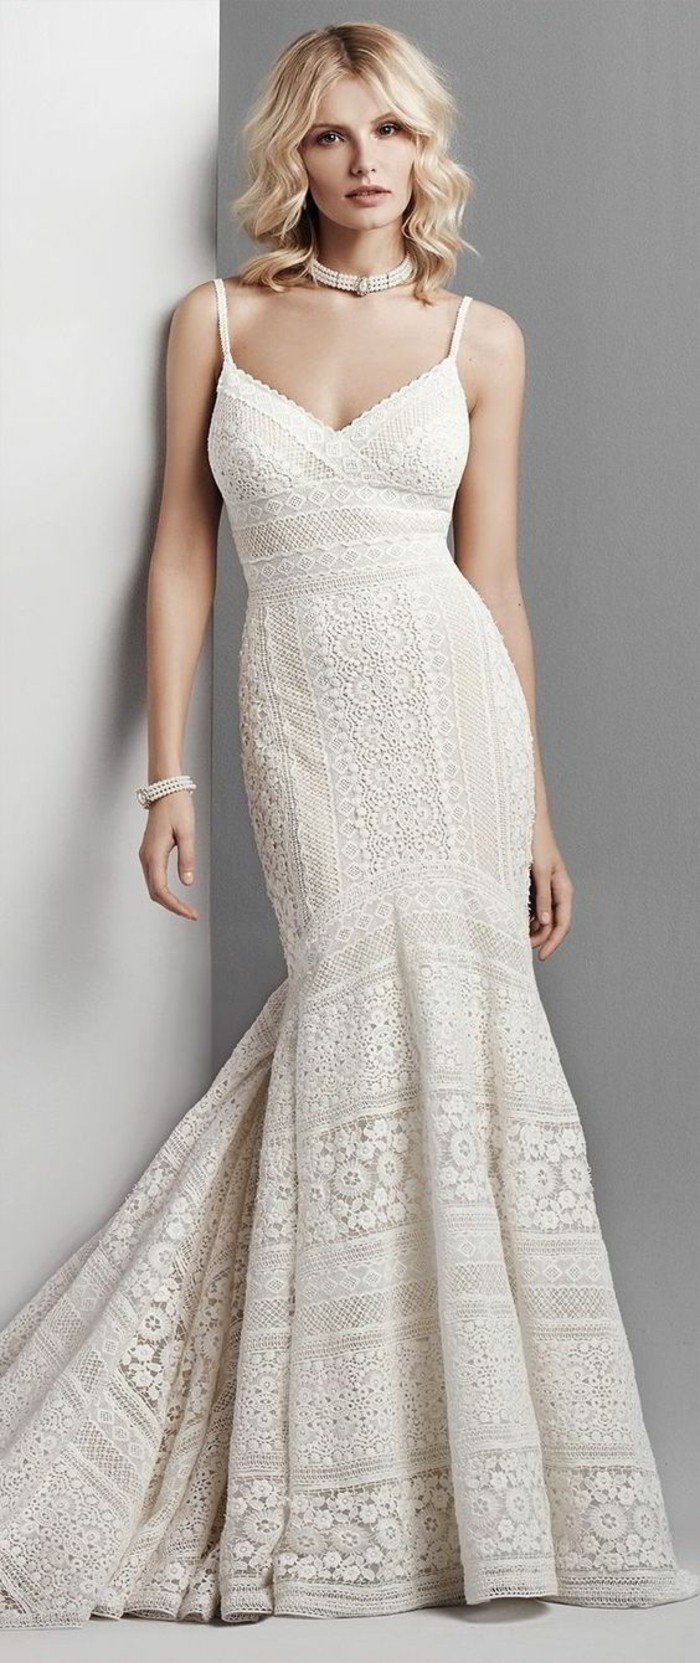 1653108835 4 Wedding dresses in boho style the hottest trend for your - Wedding dresses in boho style: the hottest trend for your wedding celebration!